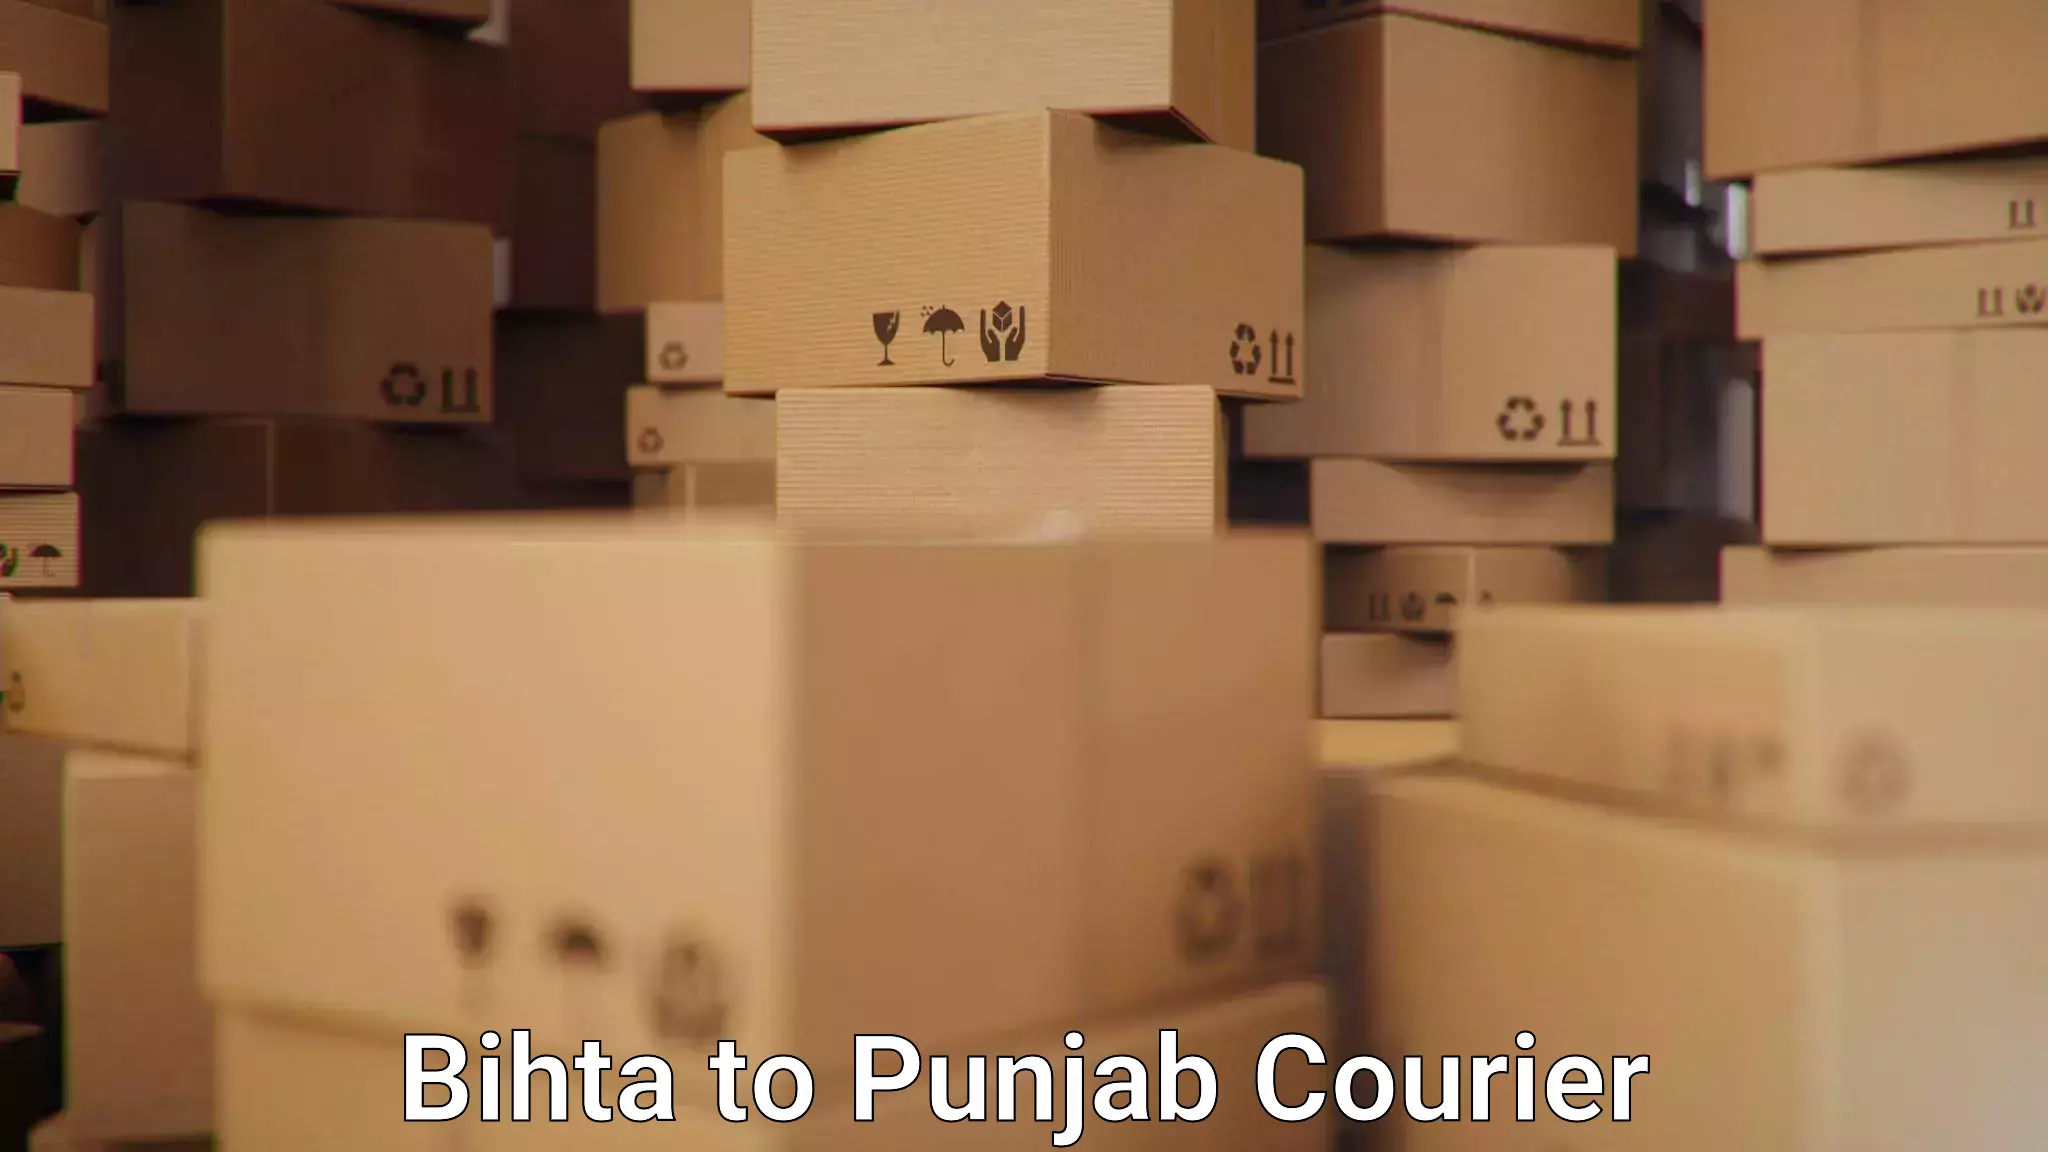 Tailored delivery services Bihta to Talwara